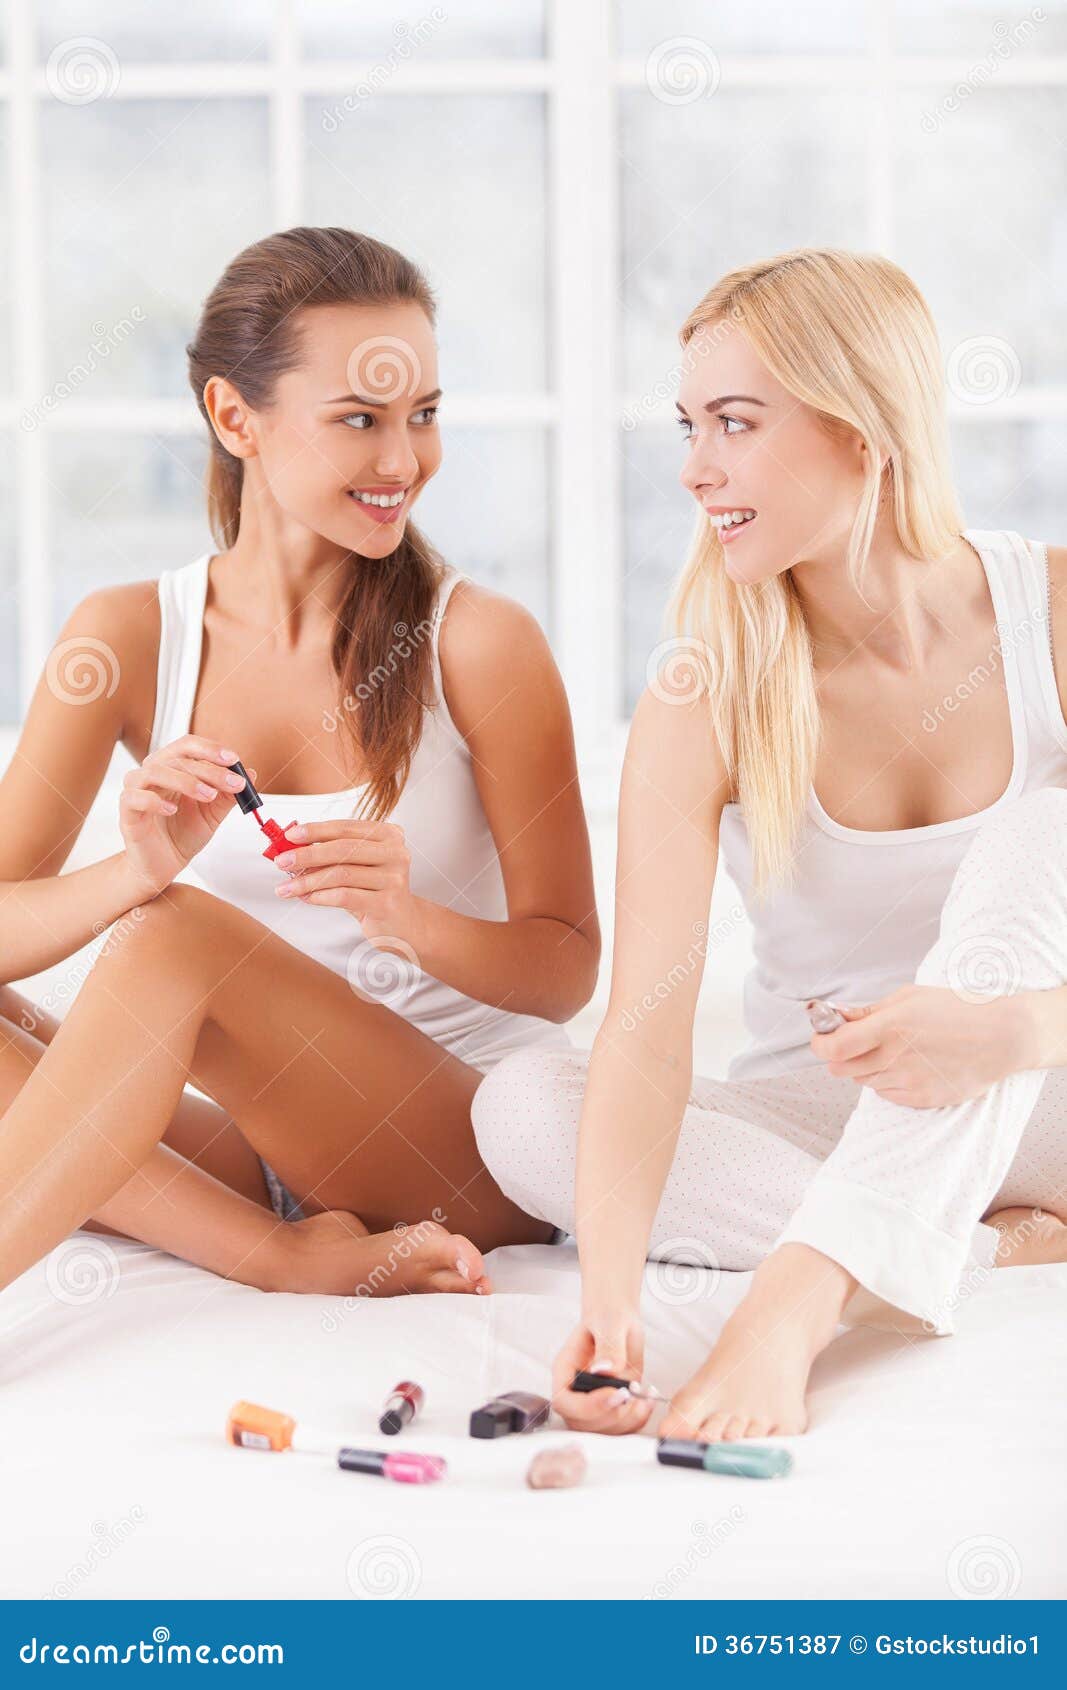 Polishing Their Nails Together. Royalty Free Stock Photography - Image 